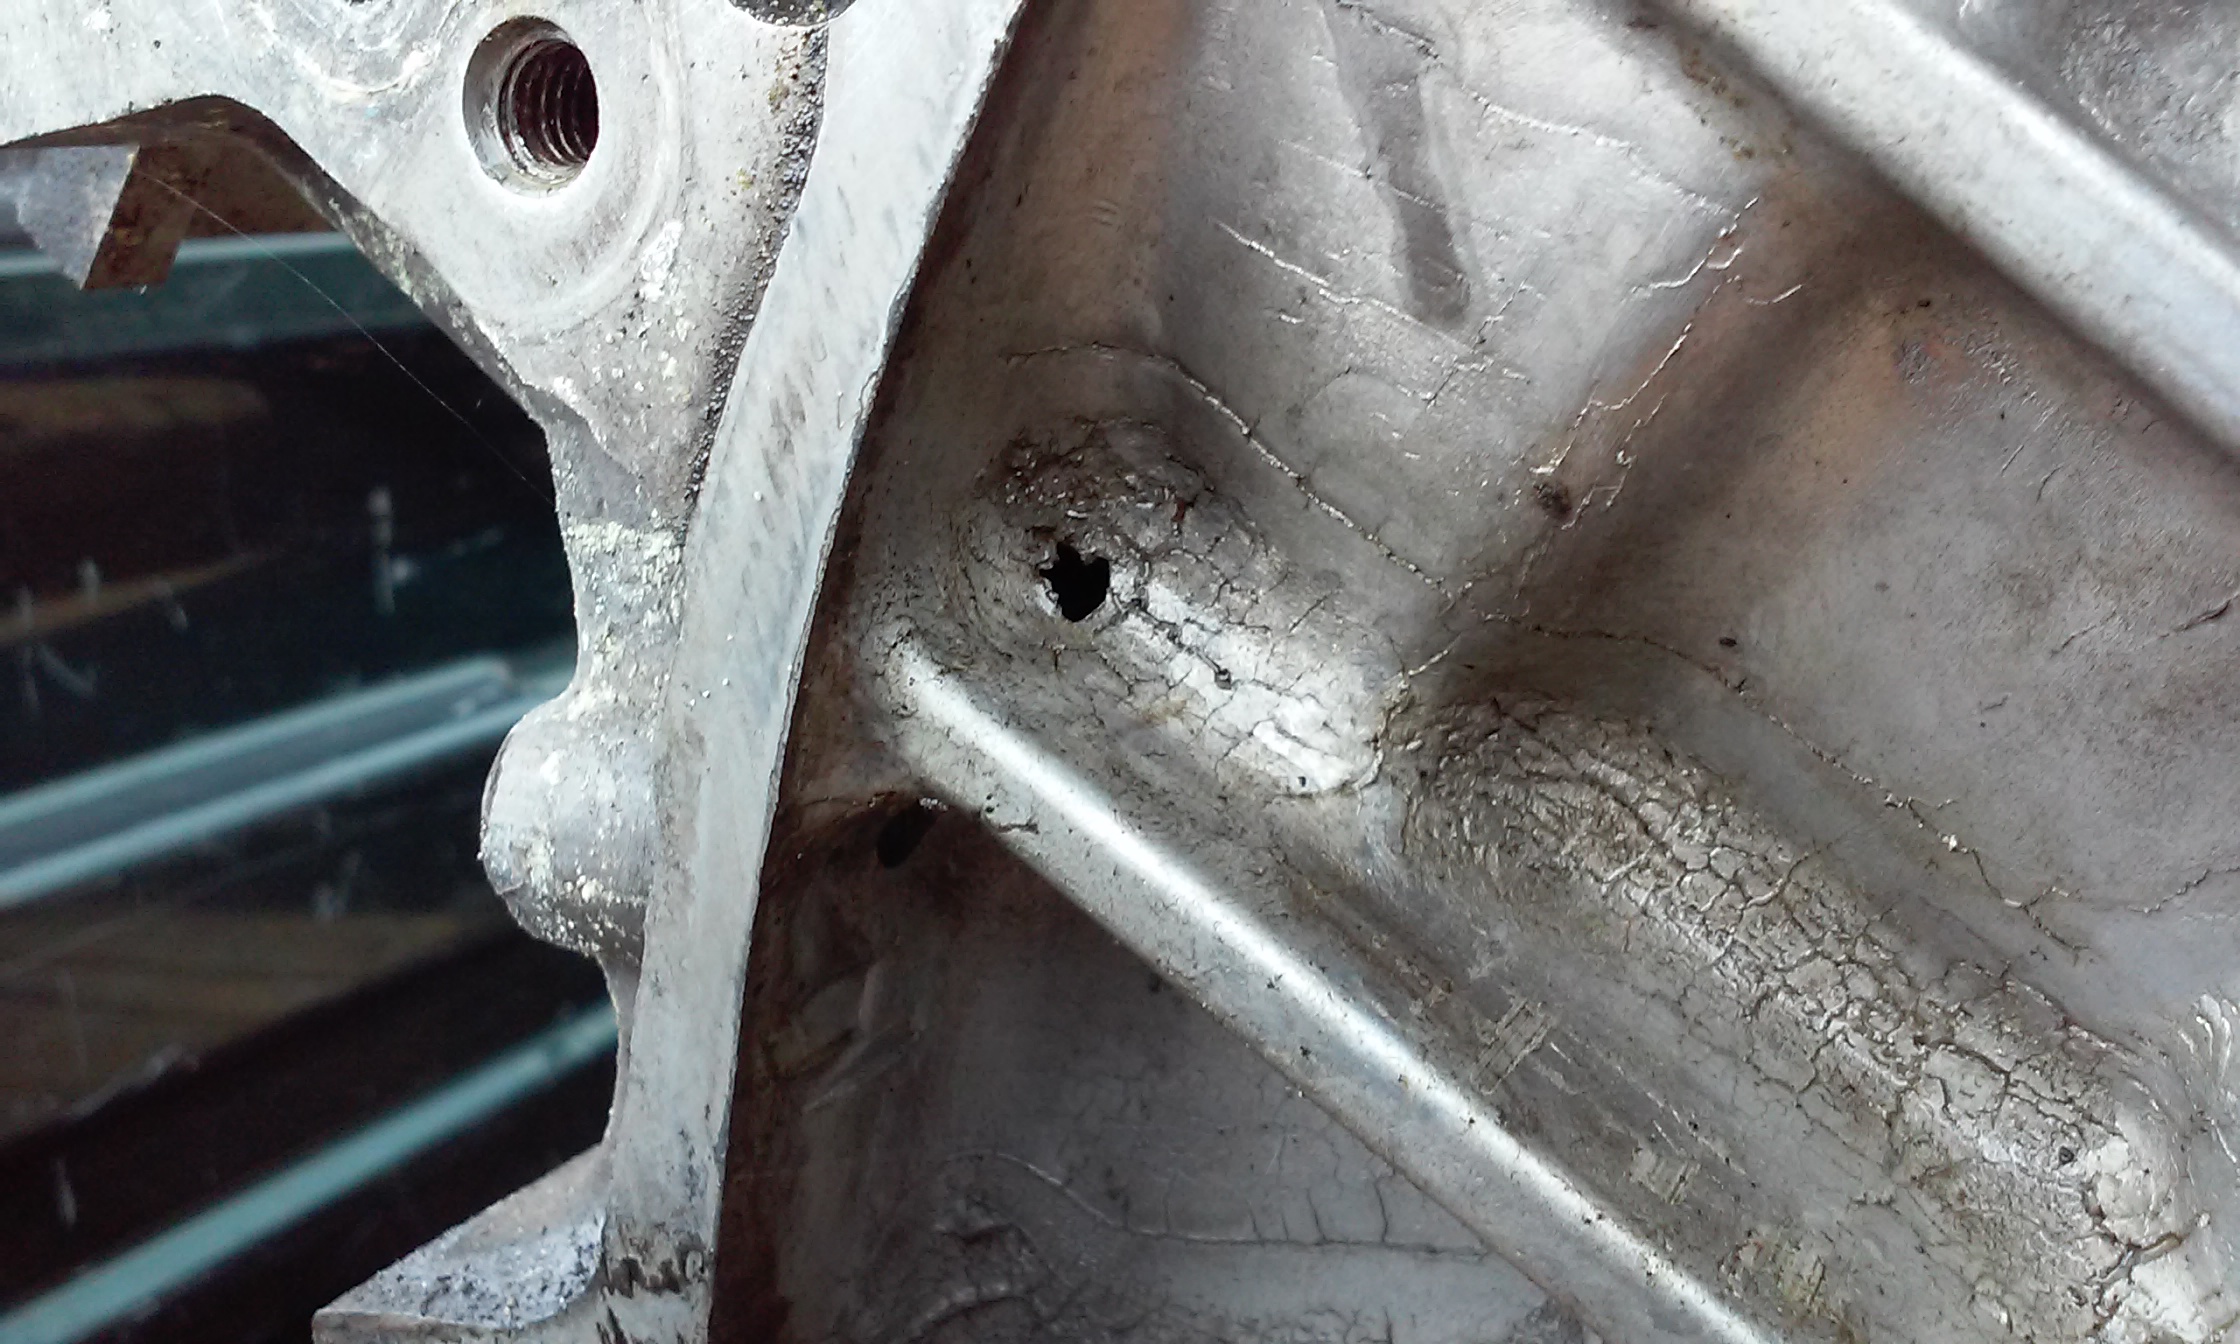 This is the casting hole on the engine I sent him.